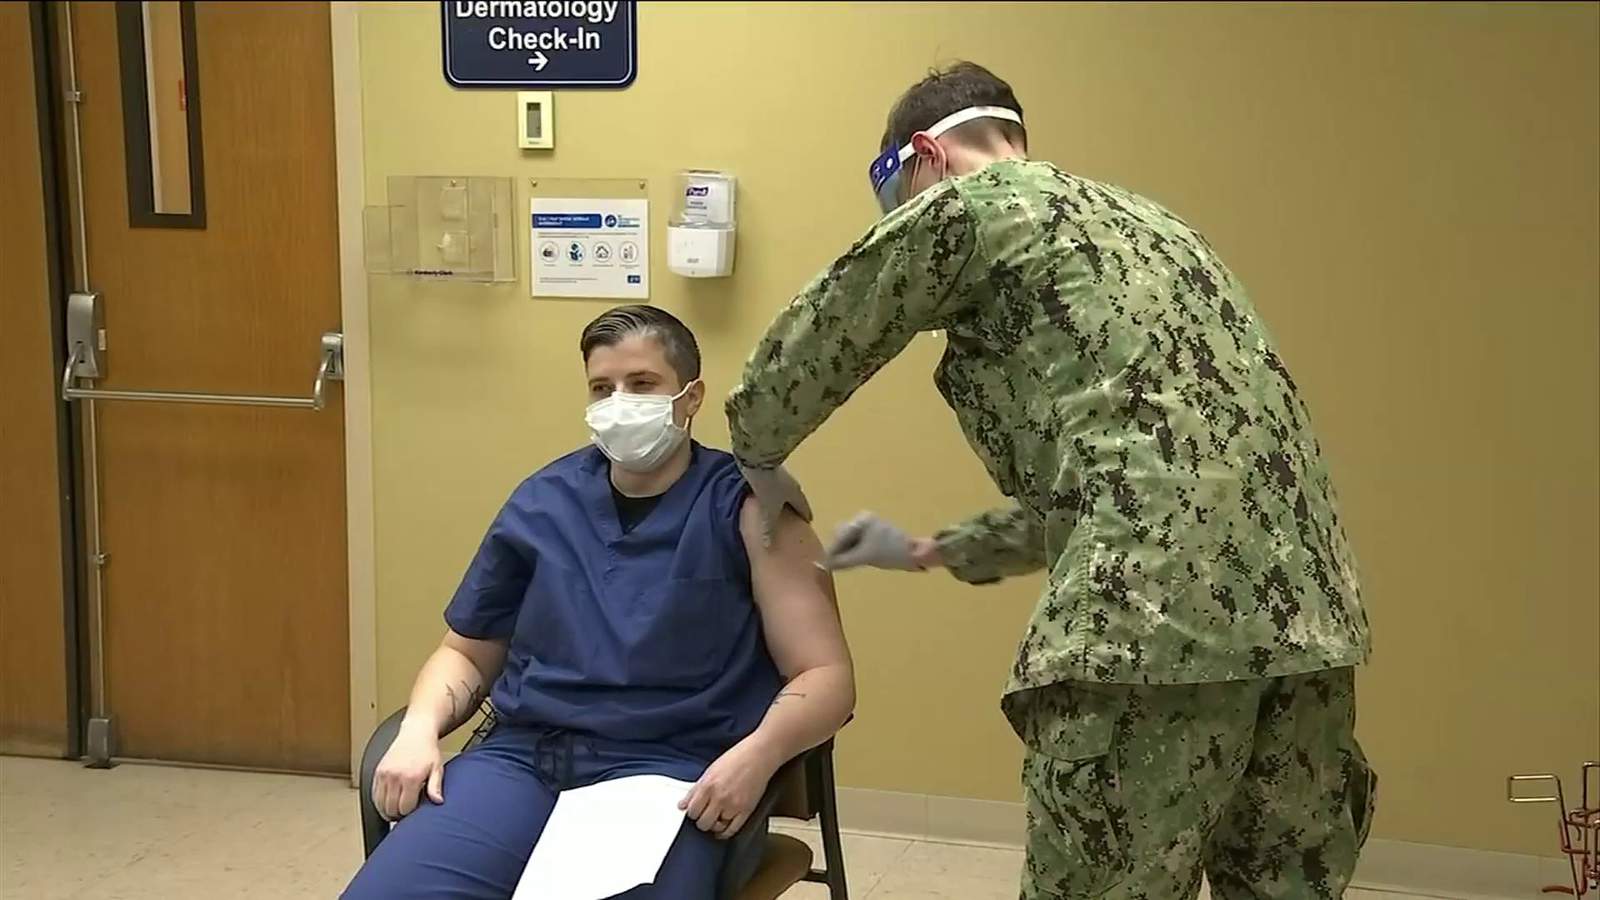 Naval Hospital Jacksonville, UF Health in Gainesville begin COVID-19 vaccinations